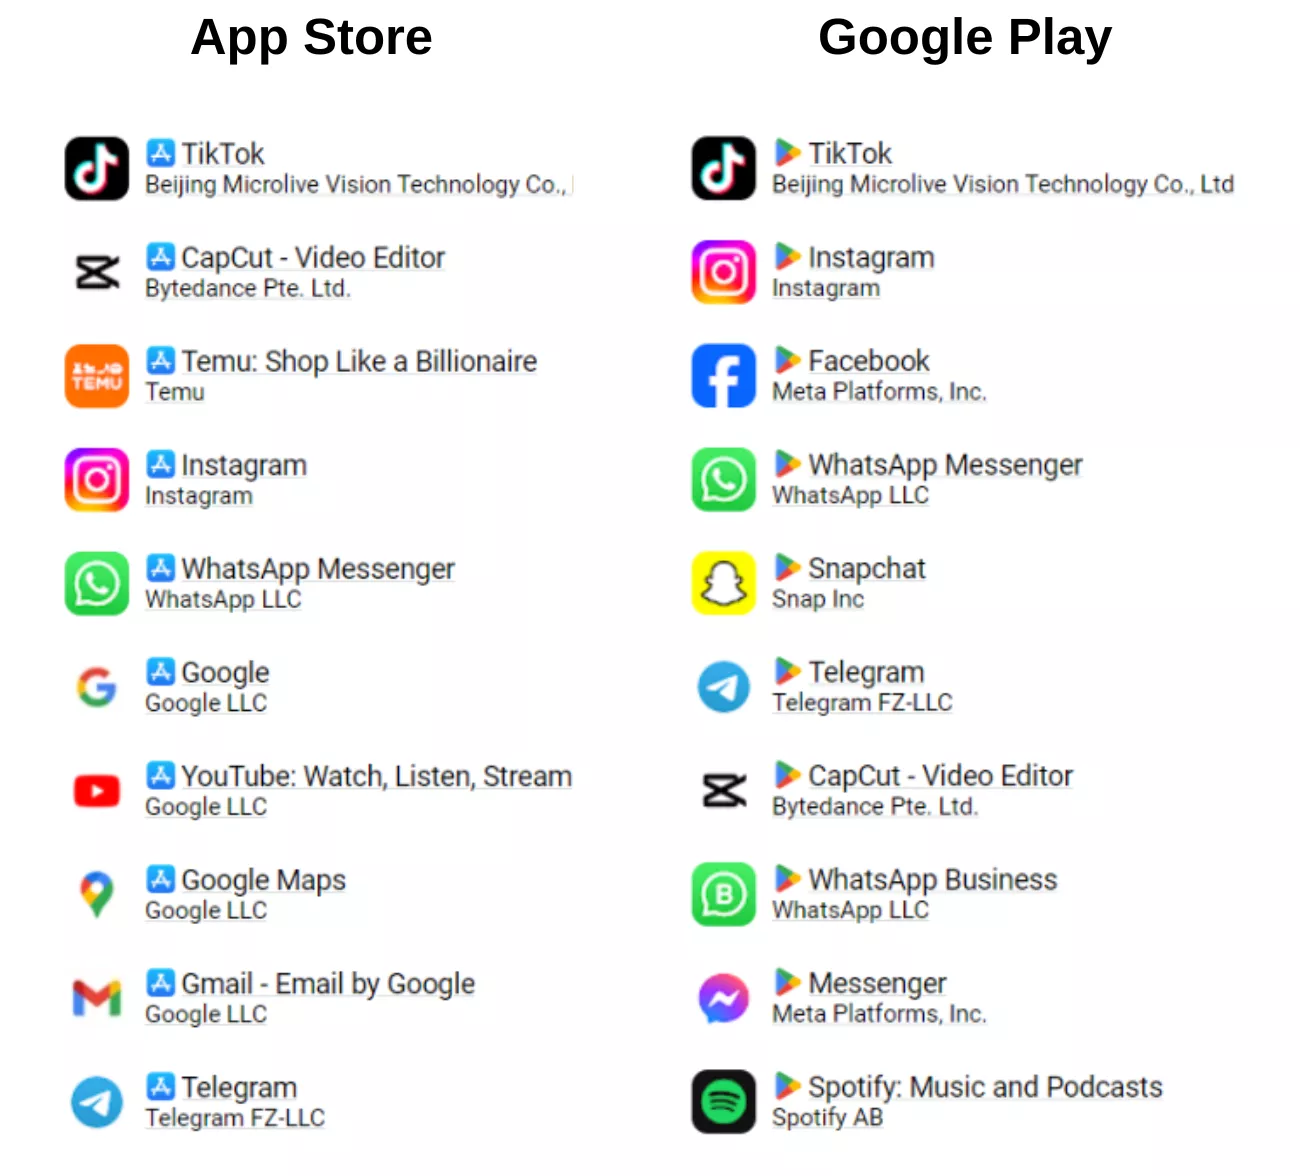 App Store and Google Play apps